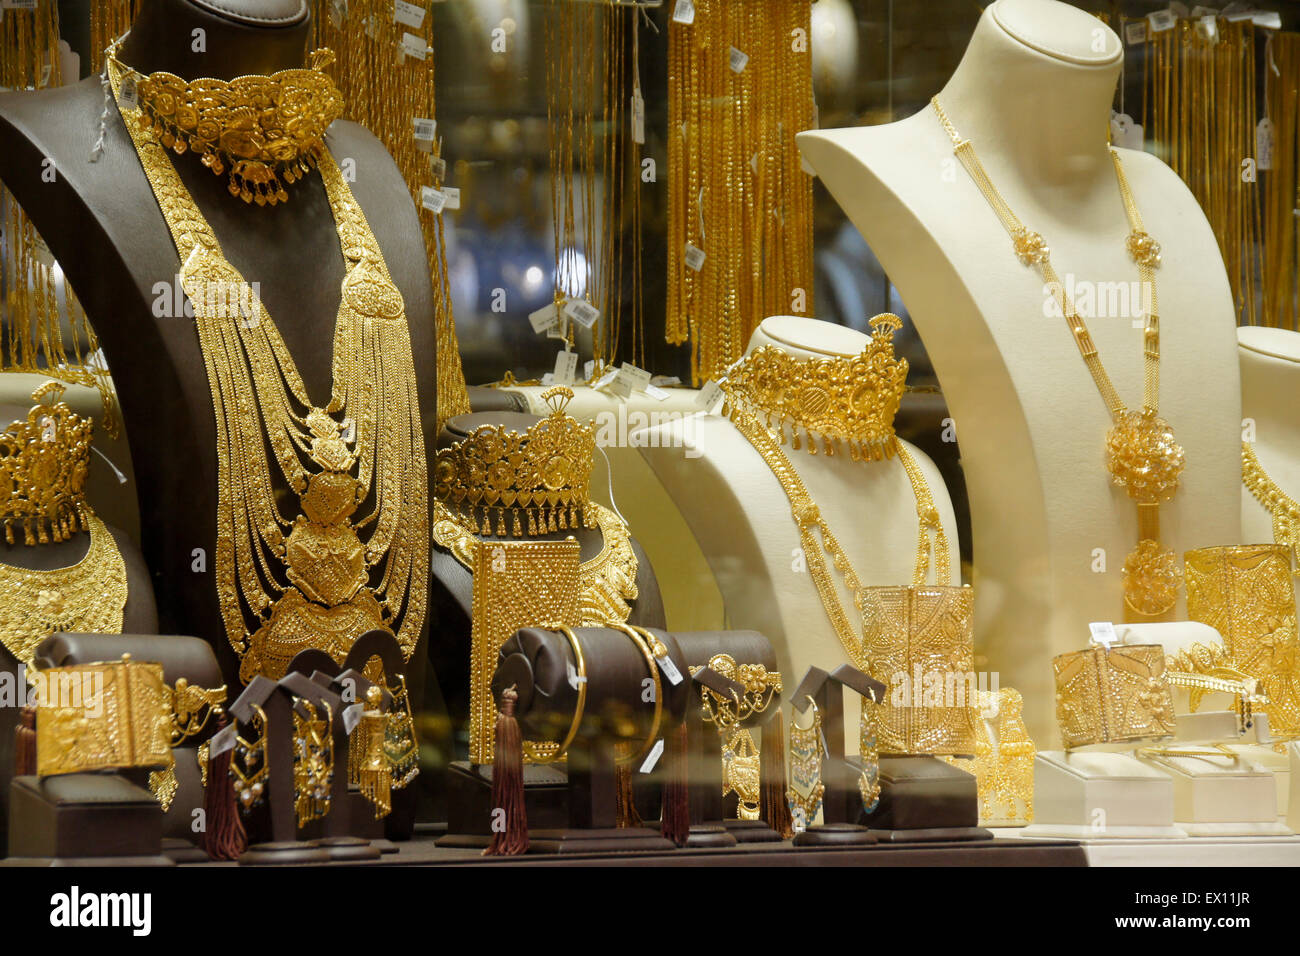 Gold Shop High Resolution Stock Photography and Images - Alamy